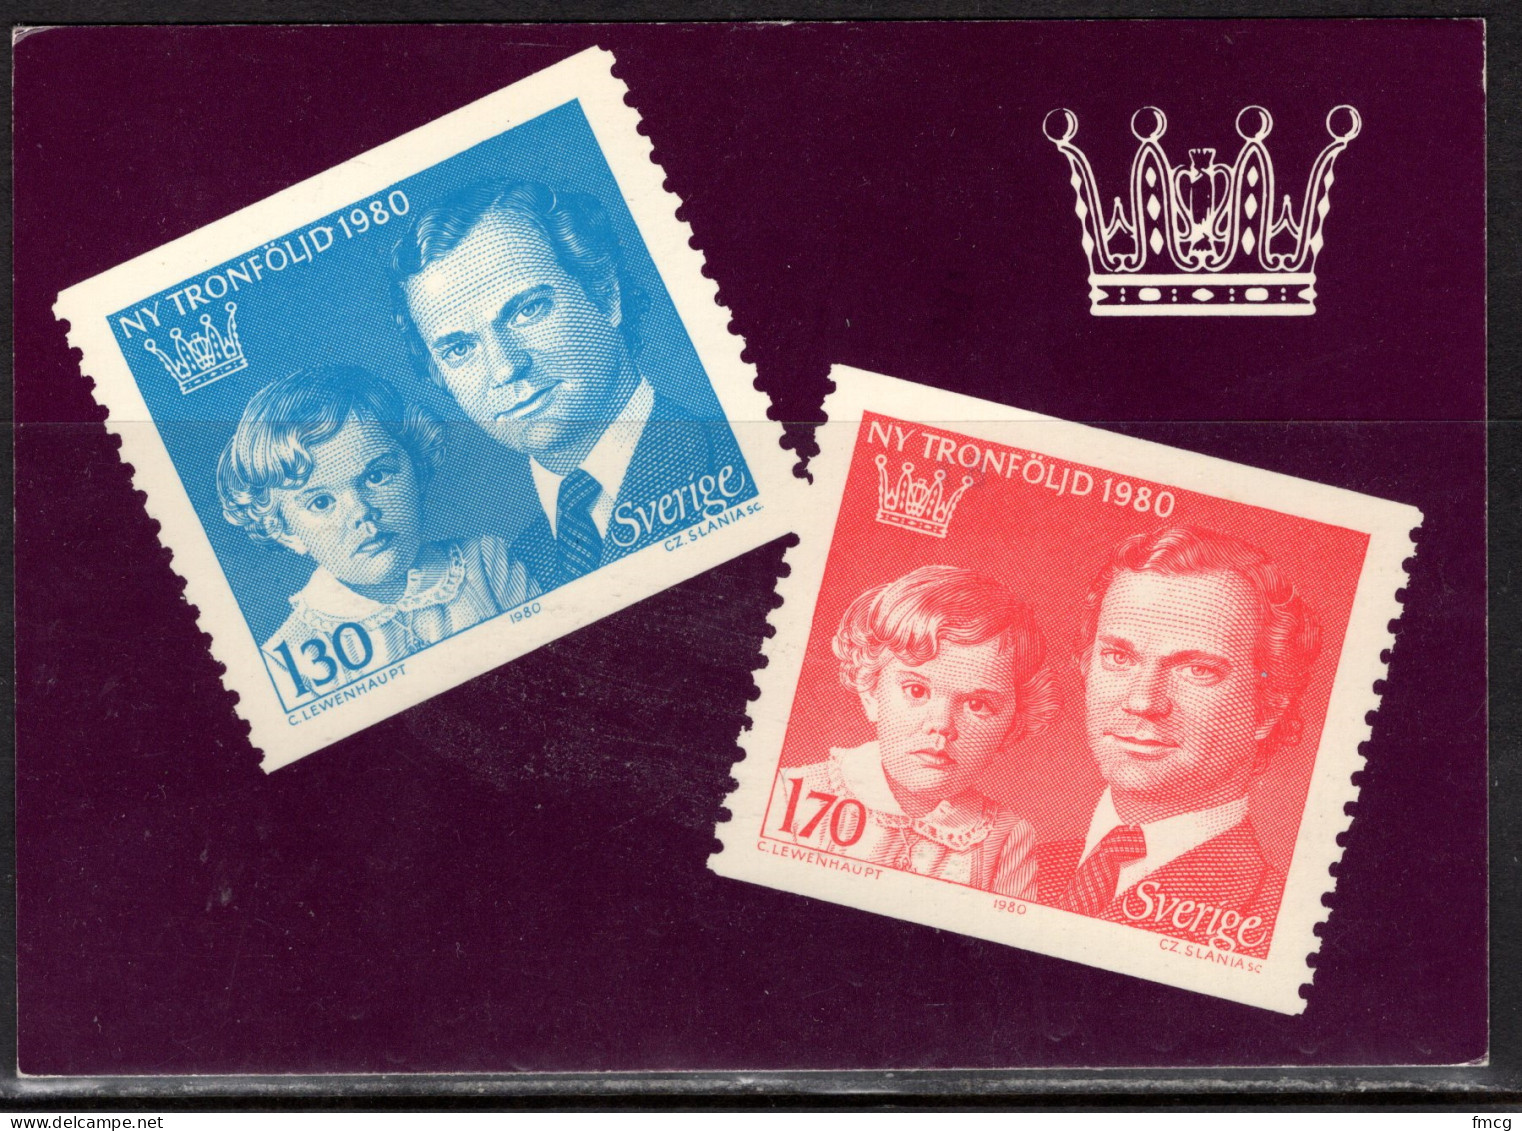 1980 Sweden Stamps, London, Mailed From Sweden - Stamps (pictures)